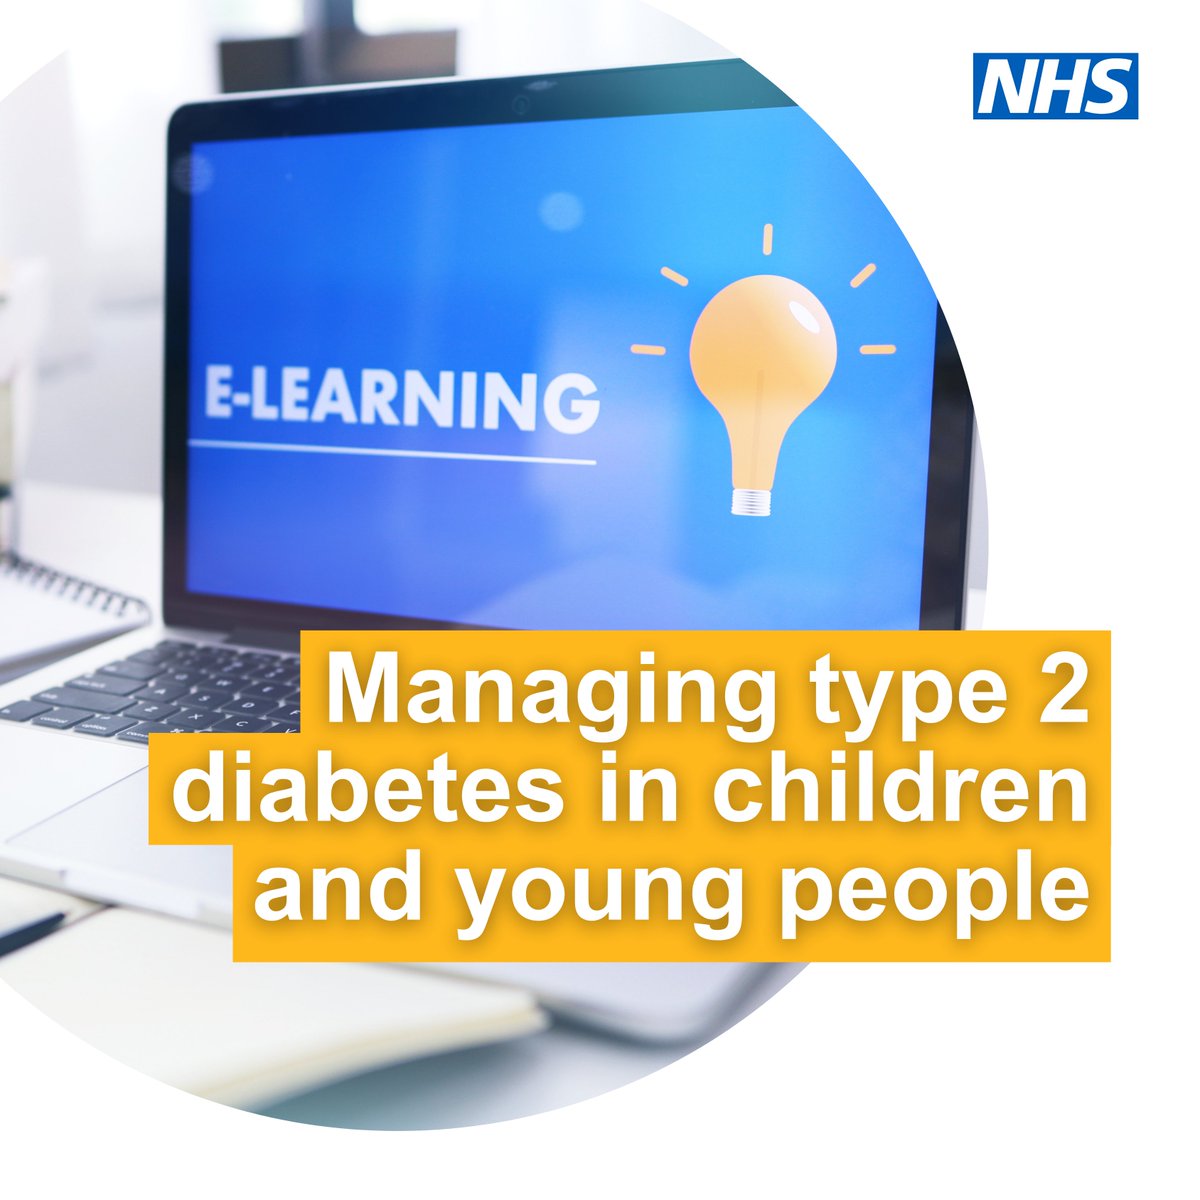 A new e-Learning programme about managing #type2diabetes in children and young people has been developed for healthcare staff. Check it out for free on the NHS Learning Hub. e-lfh.org.uk/programmes/man… @NHSEngland @DiabetesUK @CYPDiabNetwork